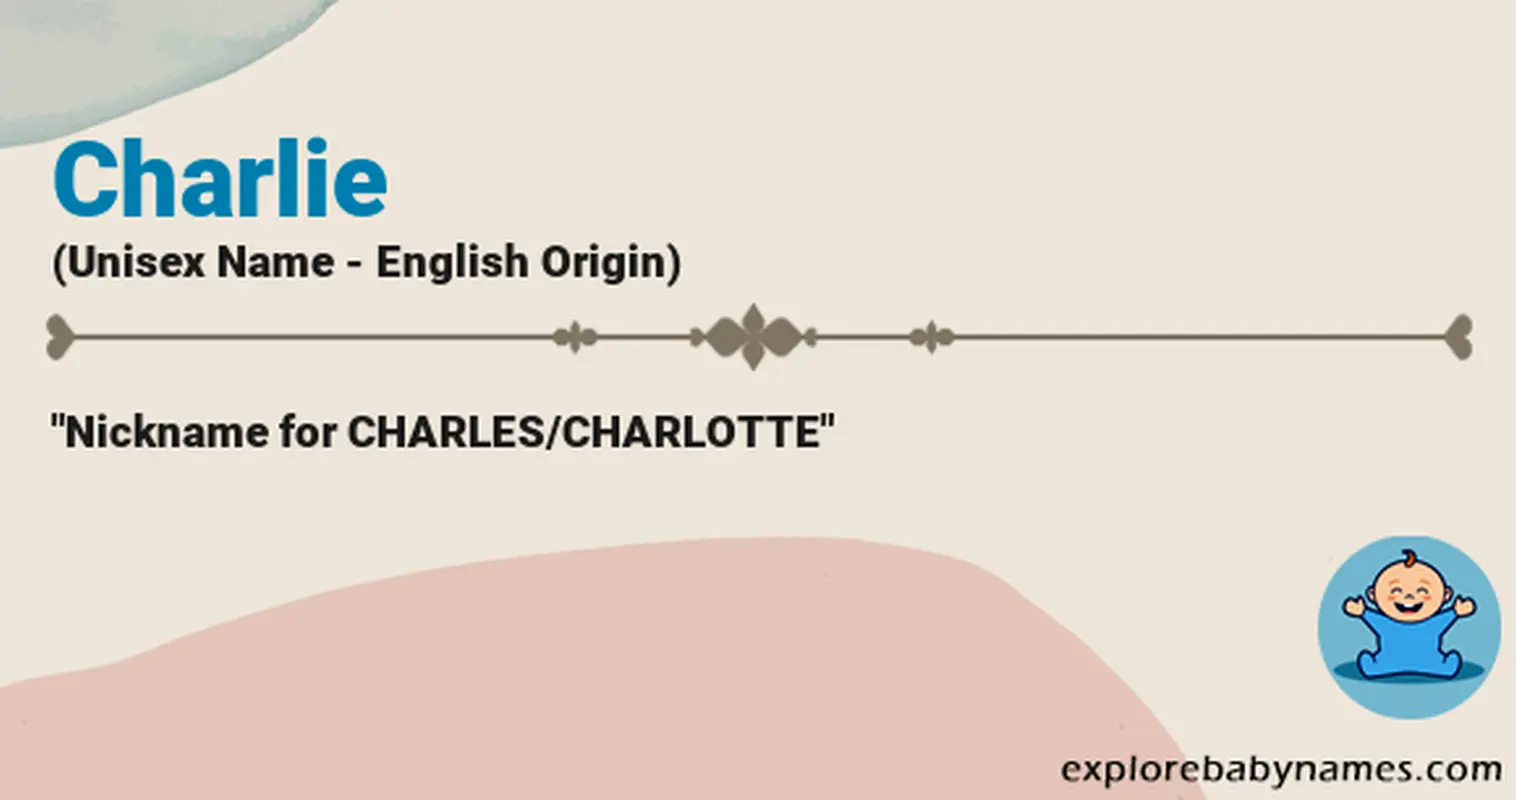 Meaning of Charlie